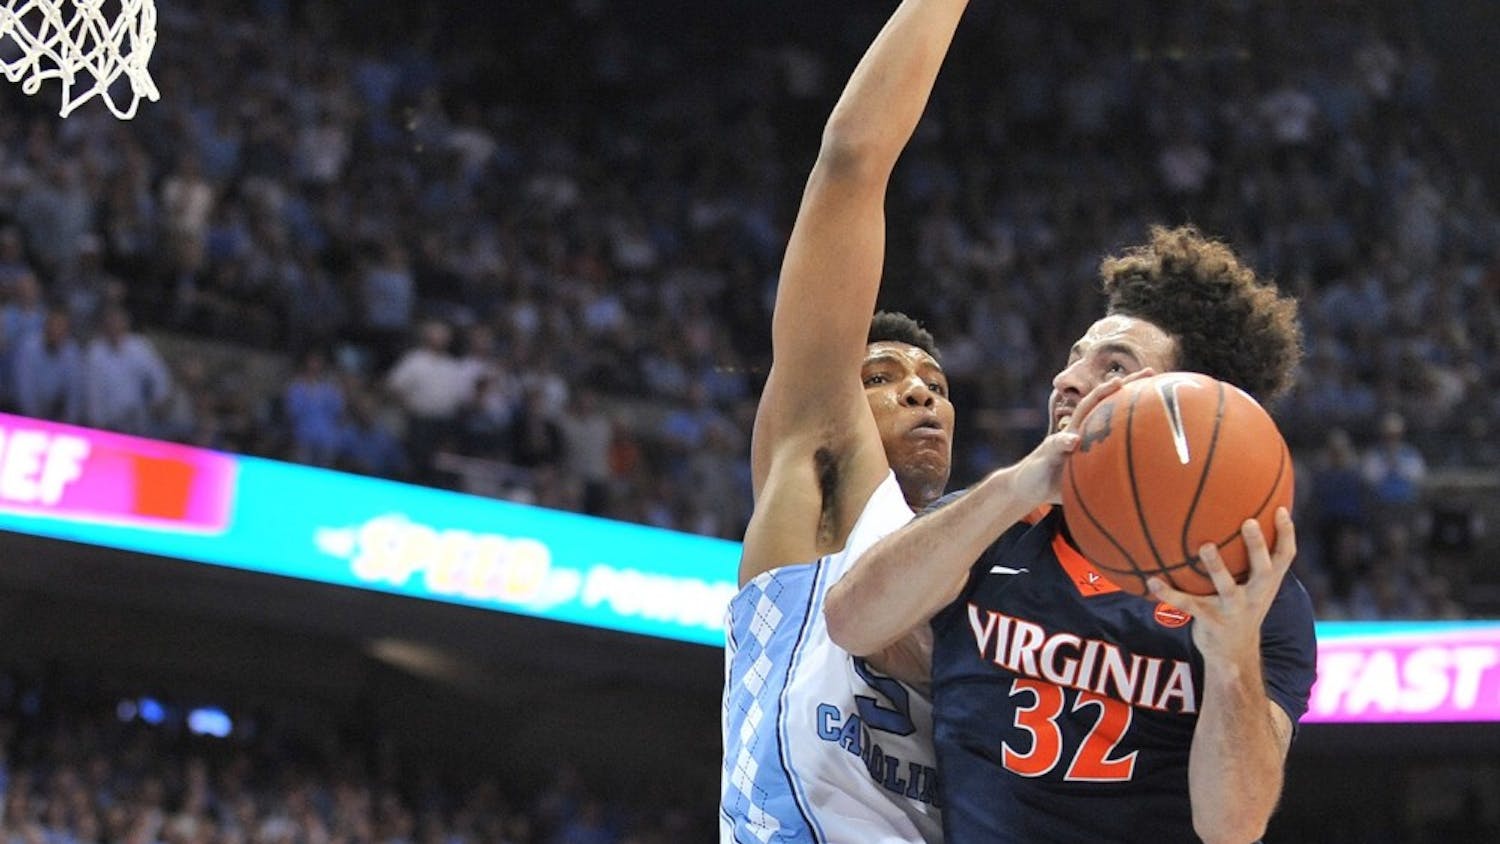 No. 10 North Carolina forward Tony Bradley (5) reaches up in an attempt to block No. 14 Virginia guard London Perrantes (32) during Saturday night’s game in the Smith Center.